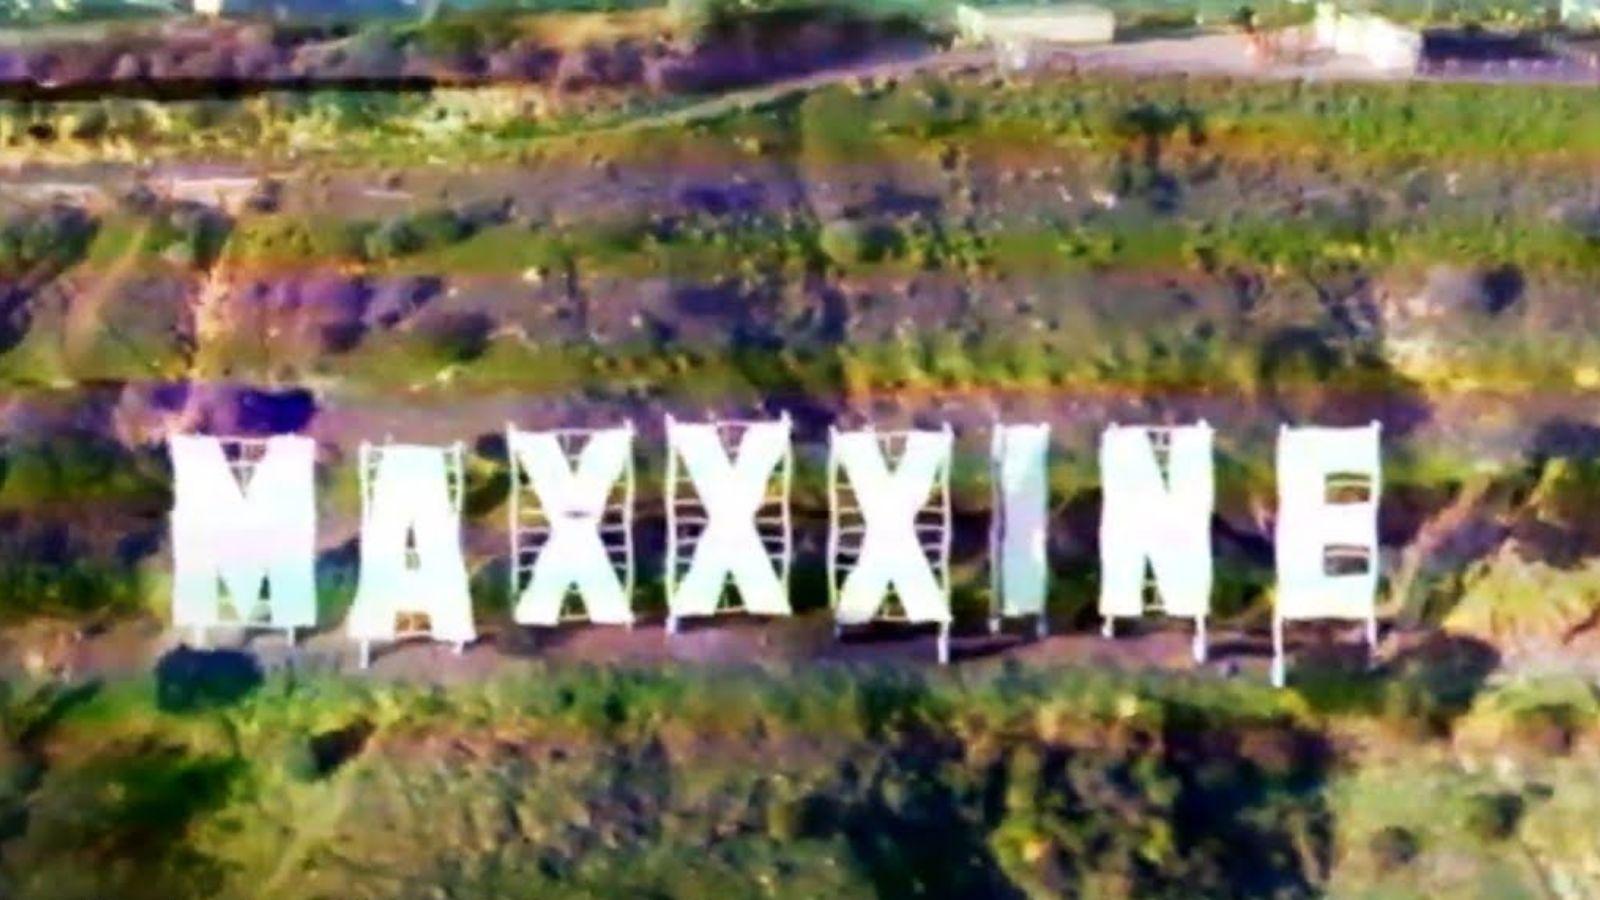 The Hollywood sign replaced with 'MAXXXINE'.